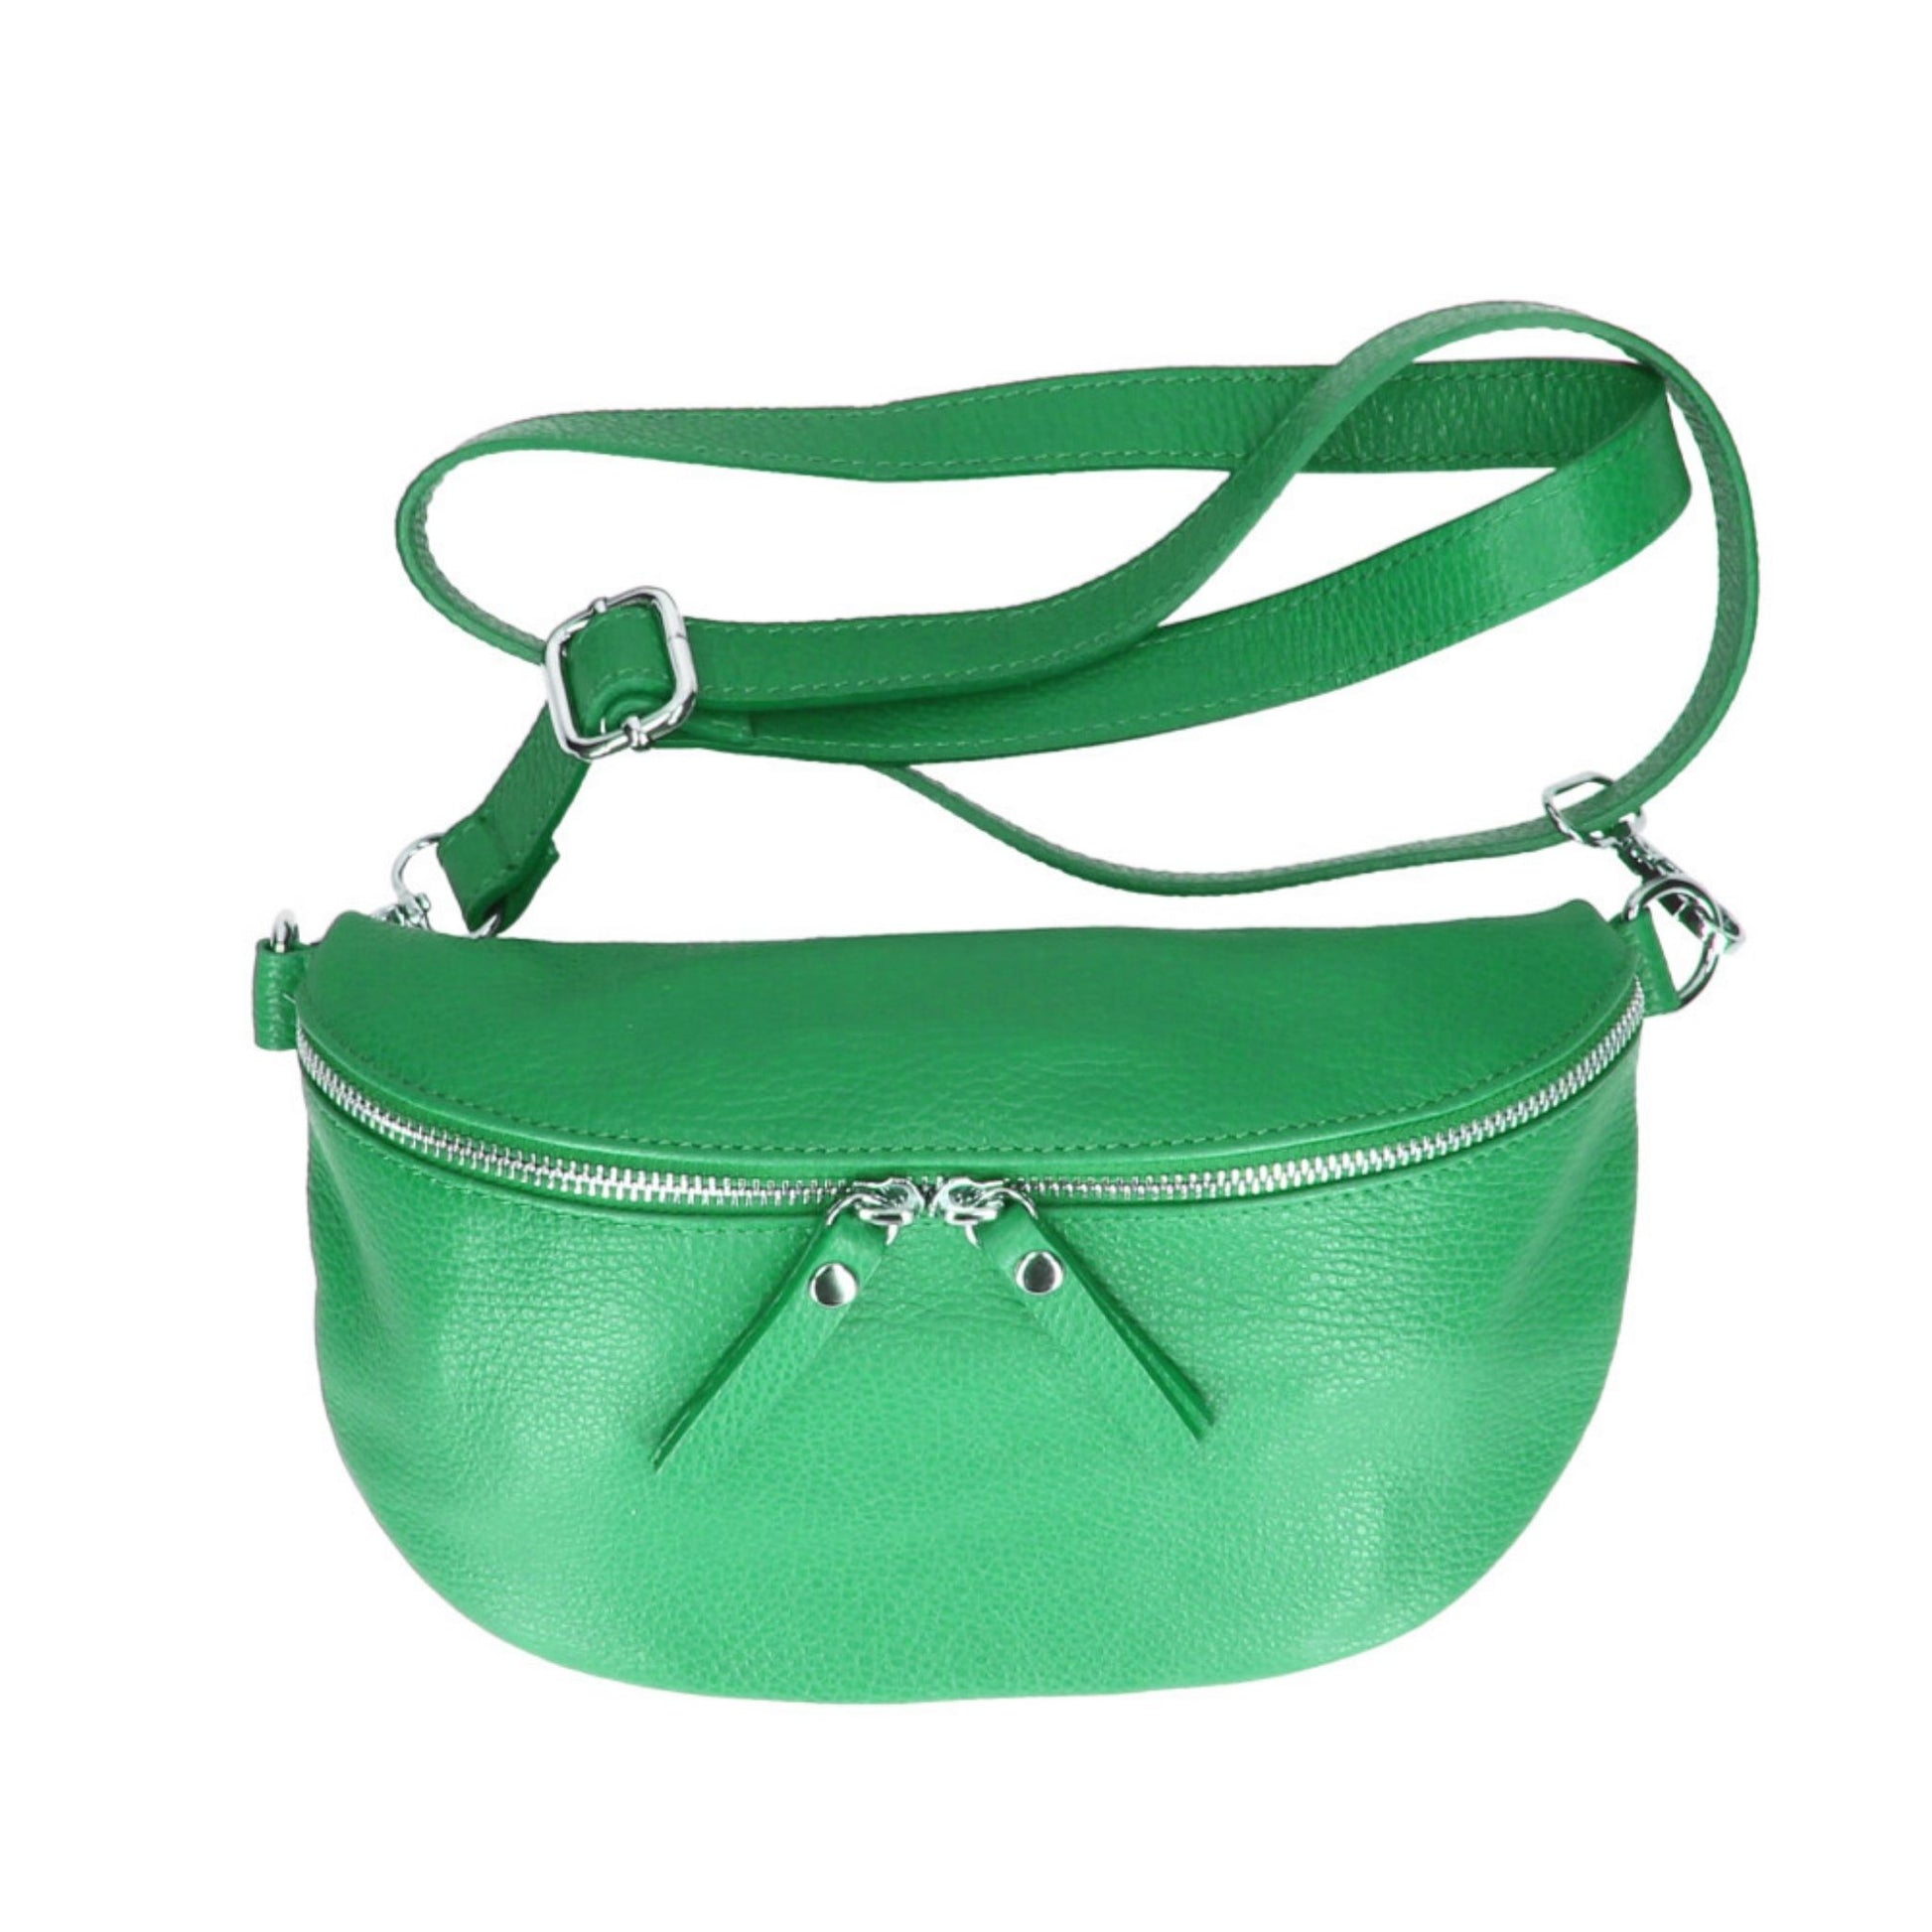 Bright green leather bumbag